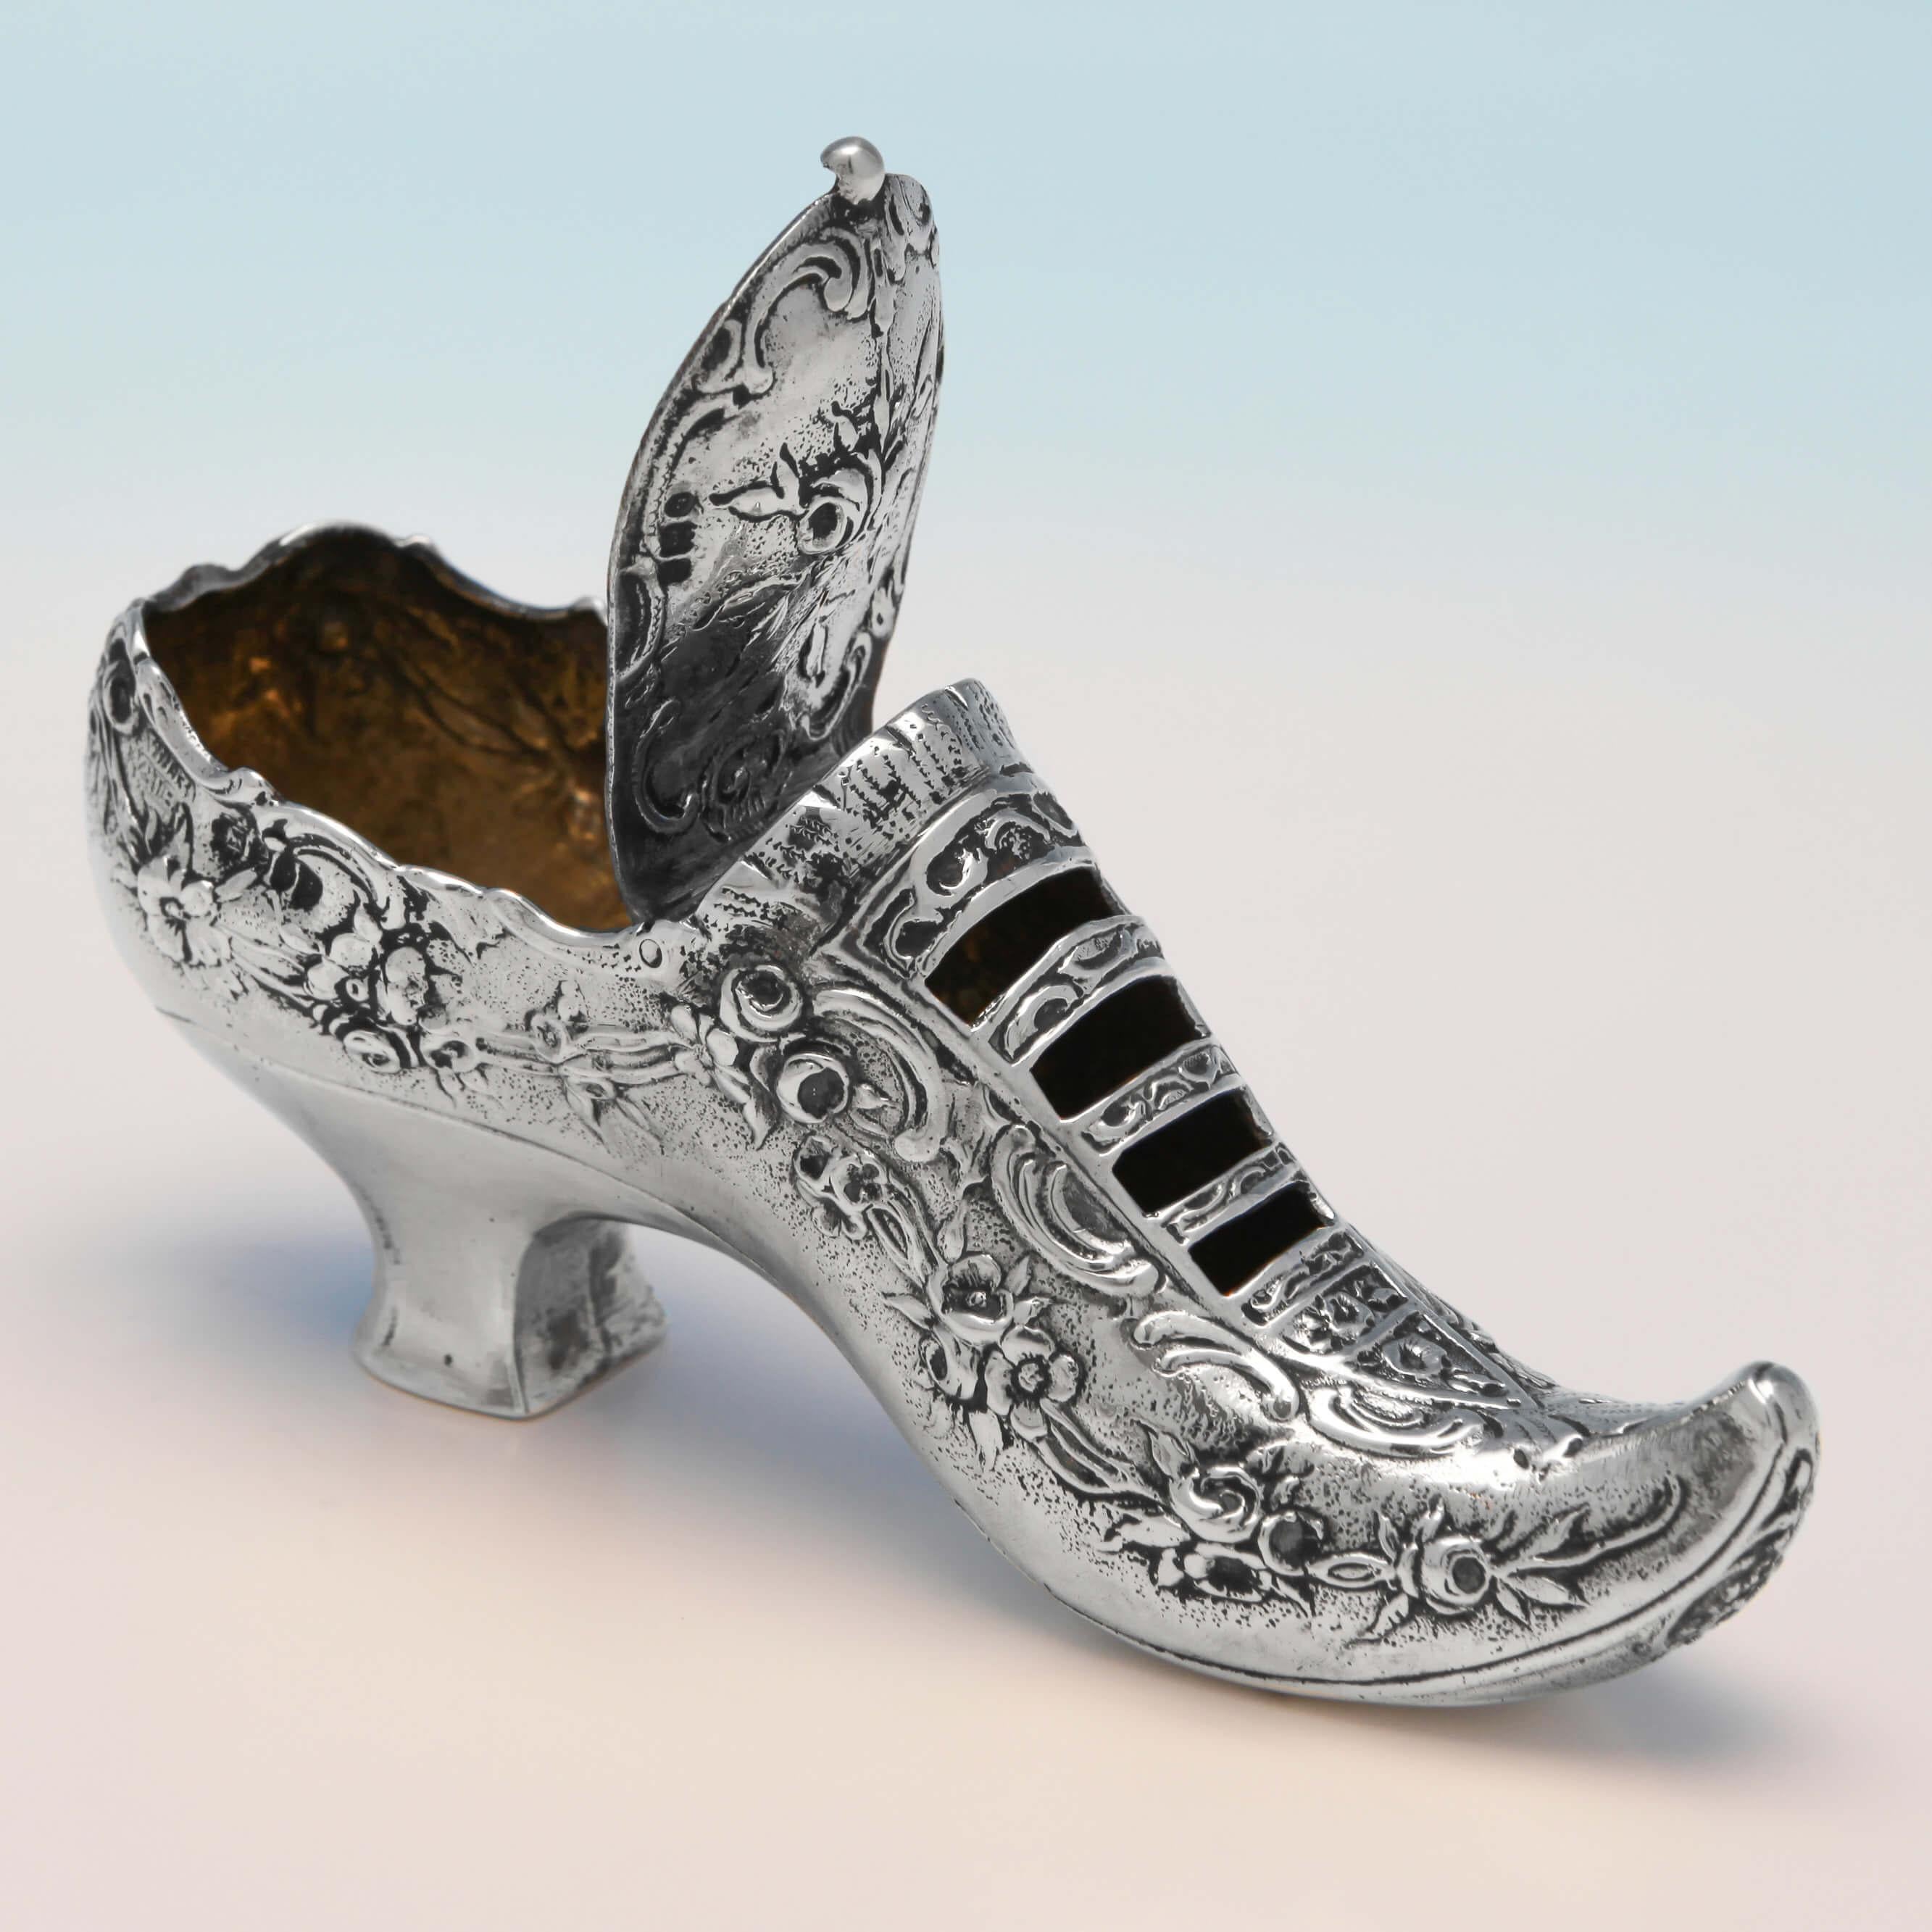 Carrying import marks for London in 1900, this novelty, Victorian, antique sterling silver trinket box, is in the form of a shoe, with a gilt interior, a hinged lid, and chased decoration throughout. The box measures: 2